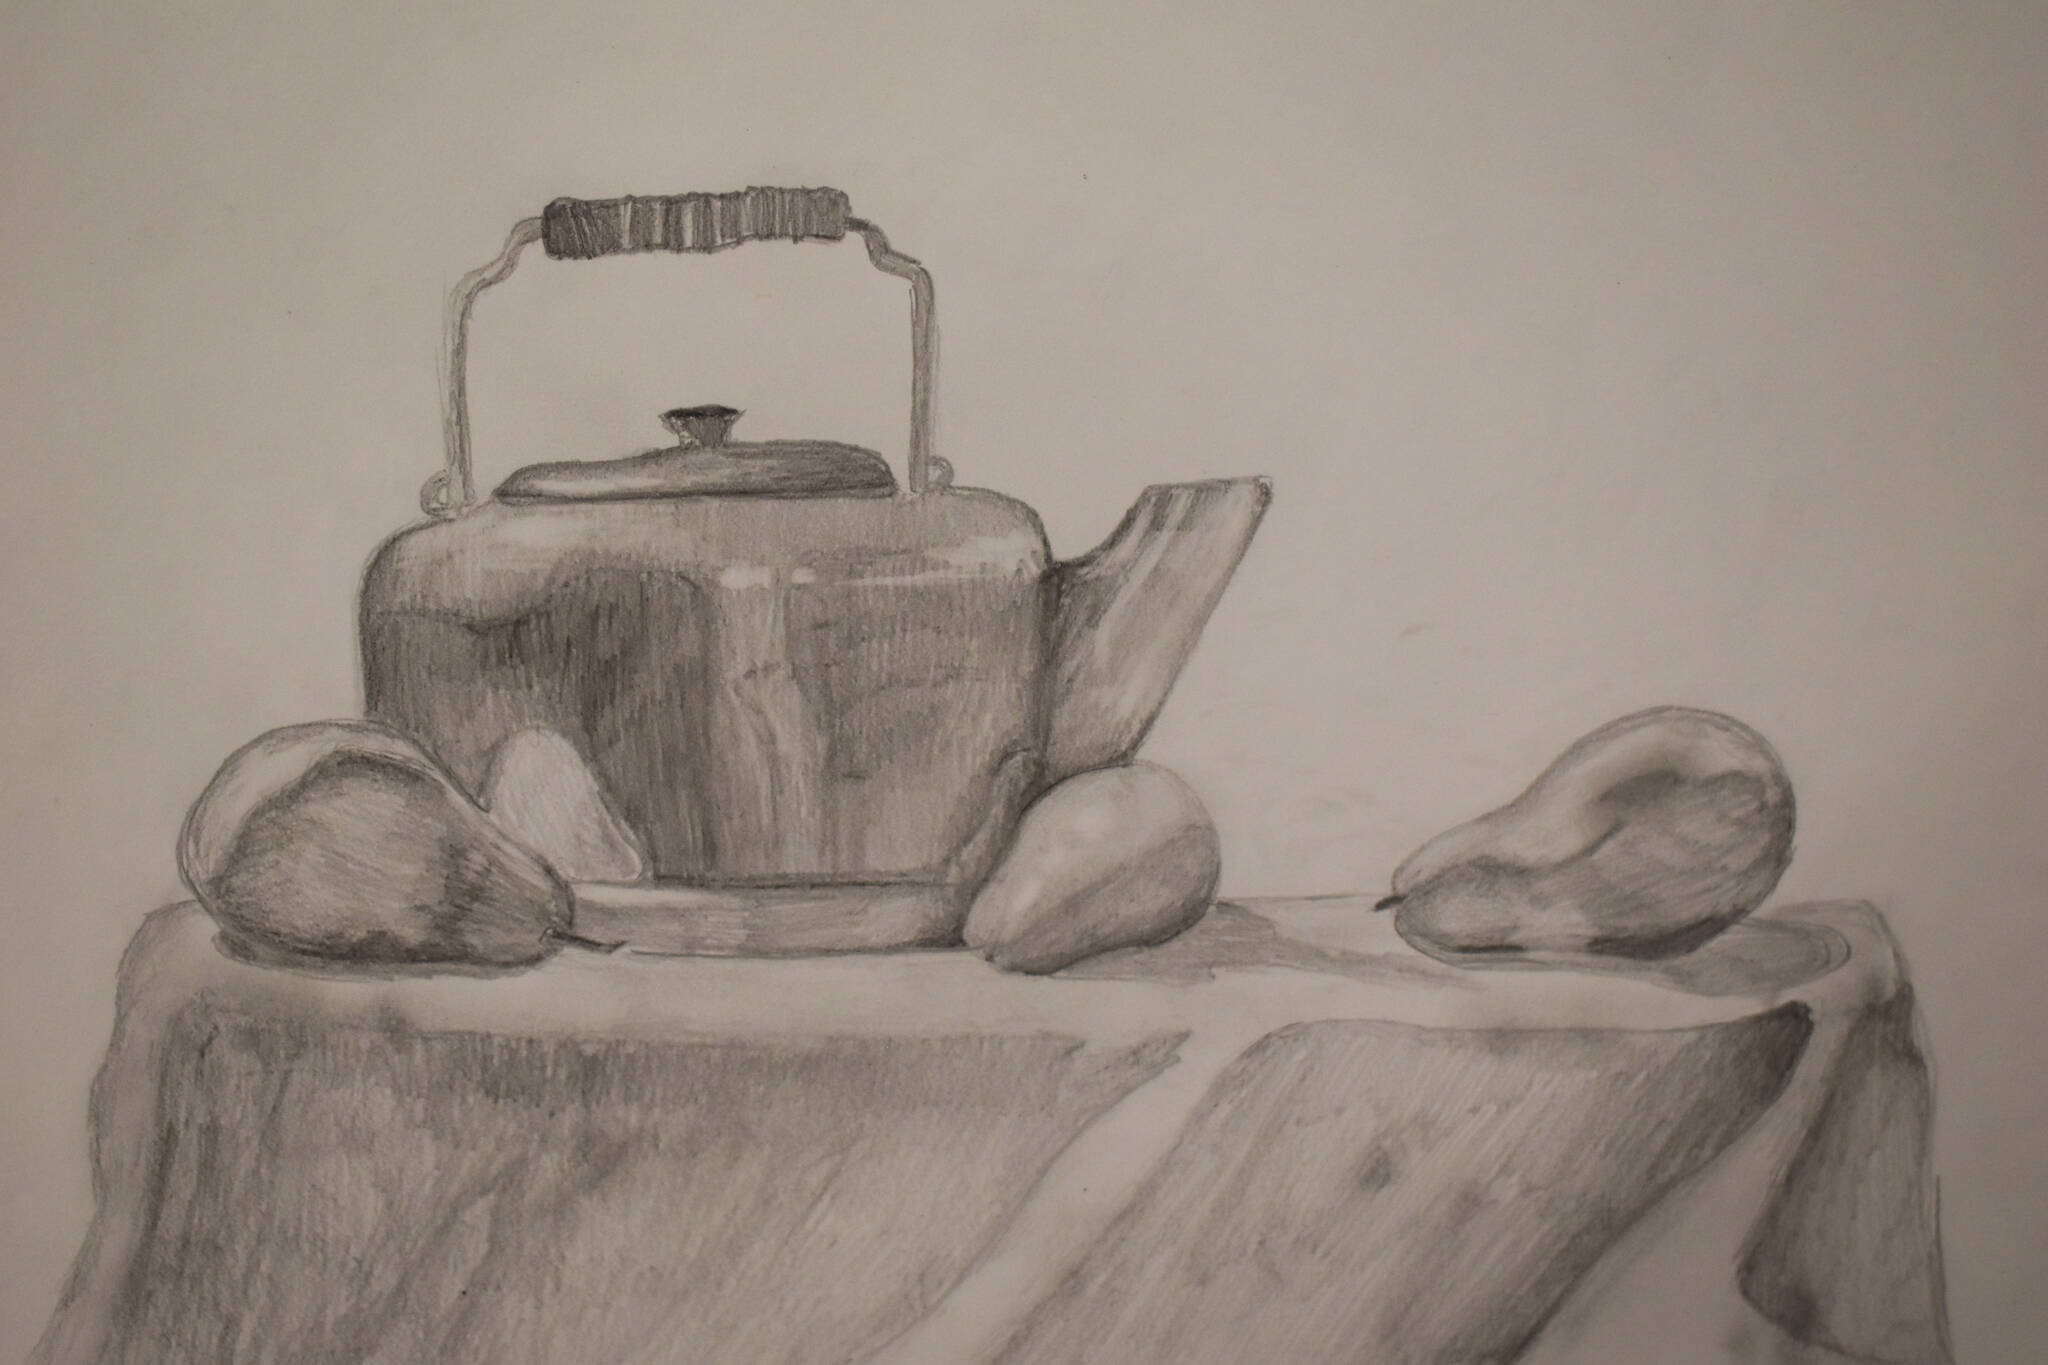 A drawing of a kettle and some pears hangs at the Kenai Art Center in Kenai, Alaska on Wednesday, April 5, 2023, in preparation for the debut of the 32nd Annual Kenai Peninsula Borough School District Visual Feast. (Jake Dye/Peninsula Clarion)